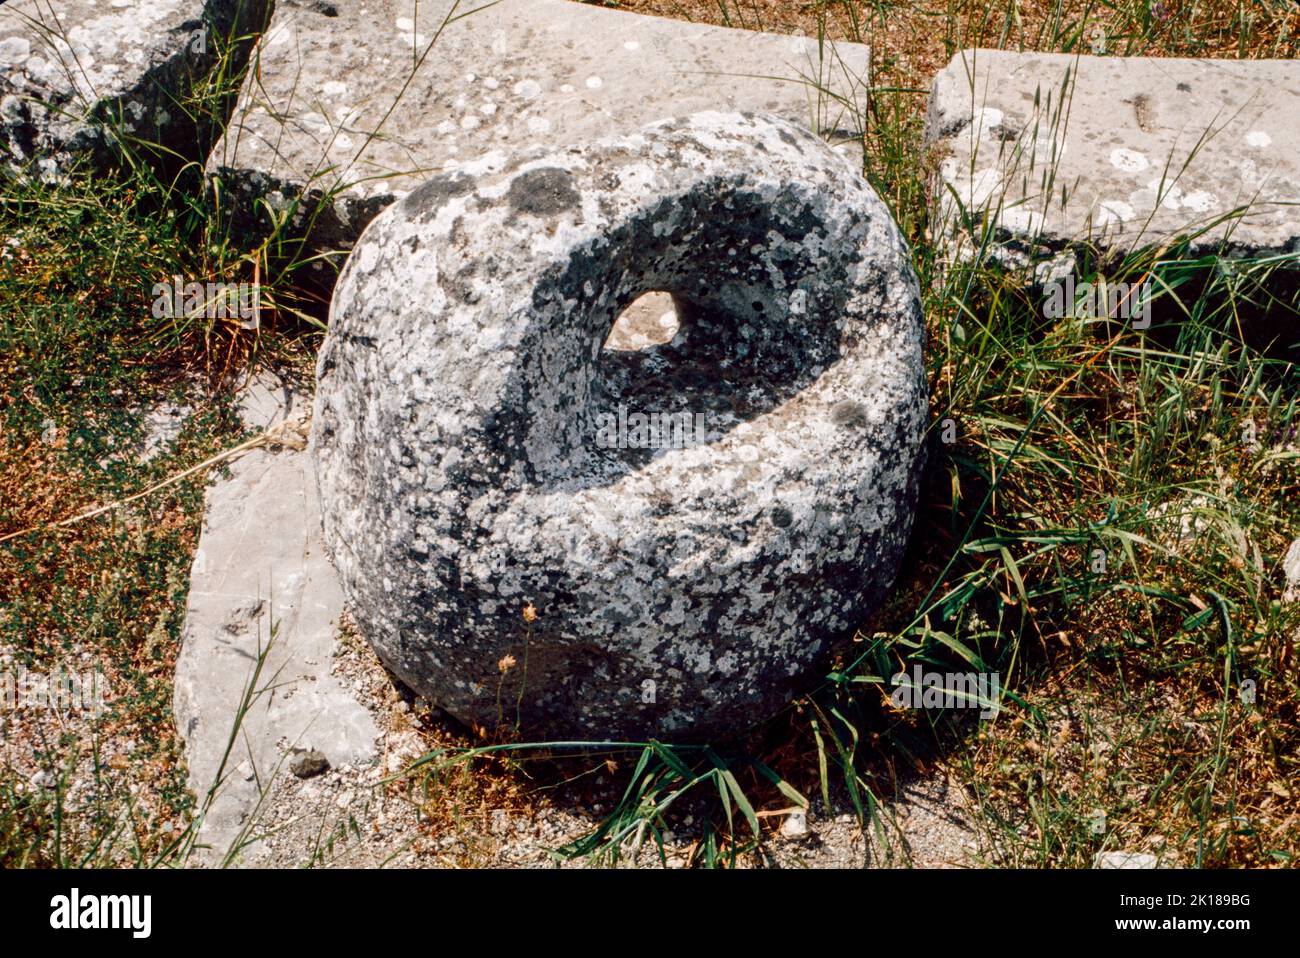 Stone weight in Roman Baths at Epidaurus - a small city (polis) in ancient Greece, on the Argolid Peninsula at the Saronic Gulf, best known for its ancient Greek sanctuary. March 1980. Archival scan from a slide. Stock Photo